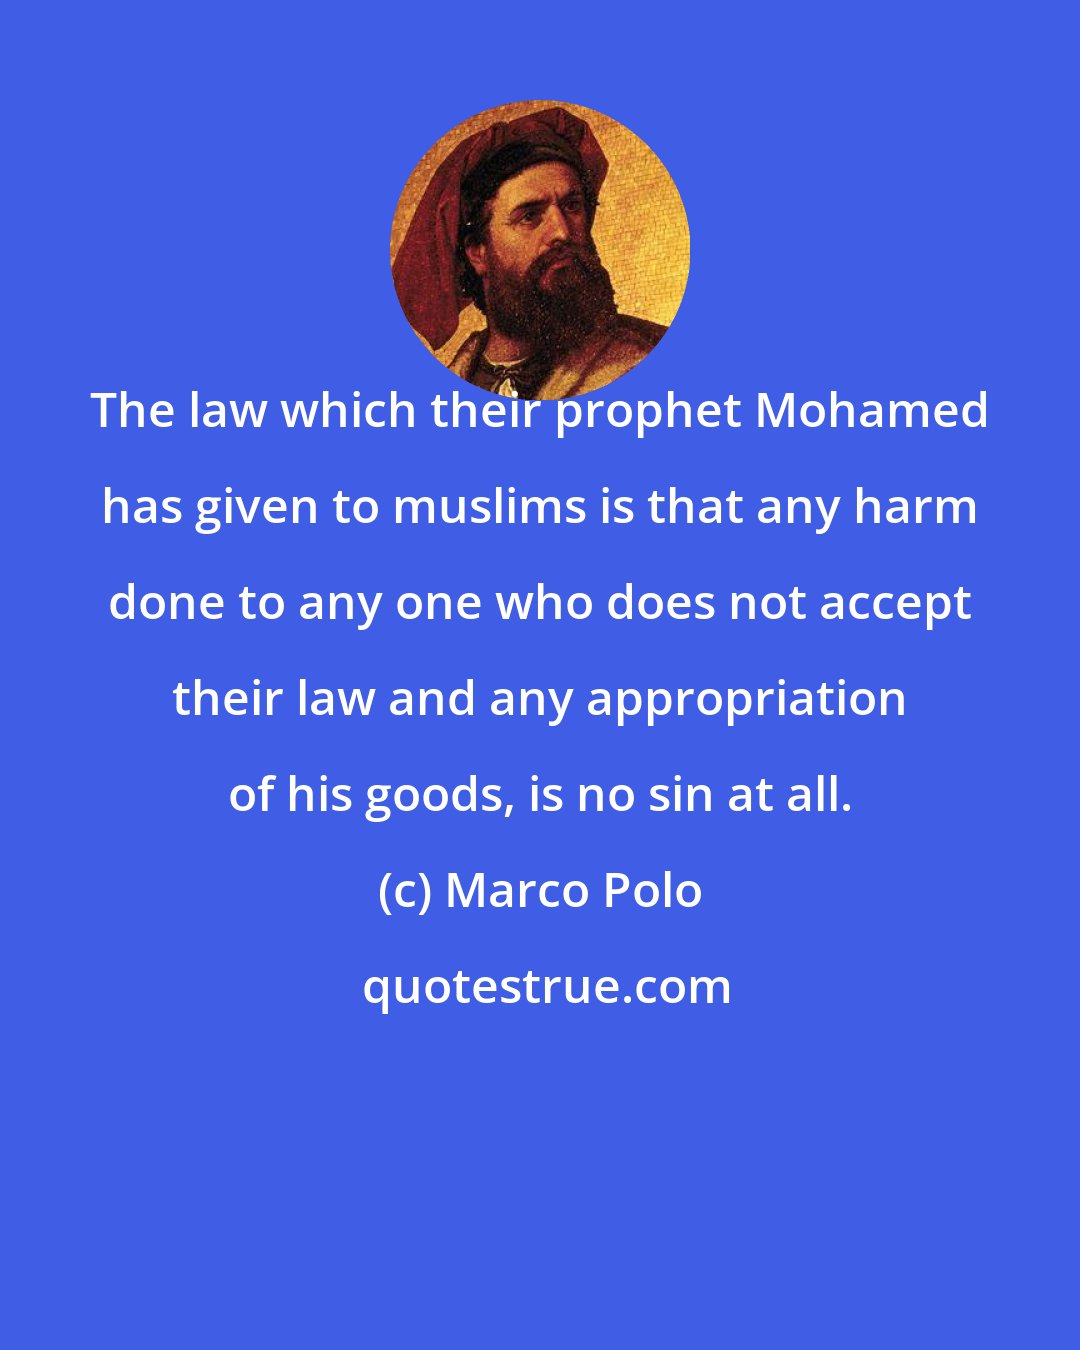 Marco Polo: The law which their prophet Mohamed has given to muslims is that any harm done to any one who does not accept their law and any appropriation of his goods, is no sin at all.